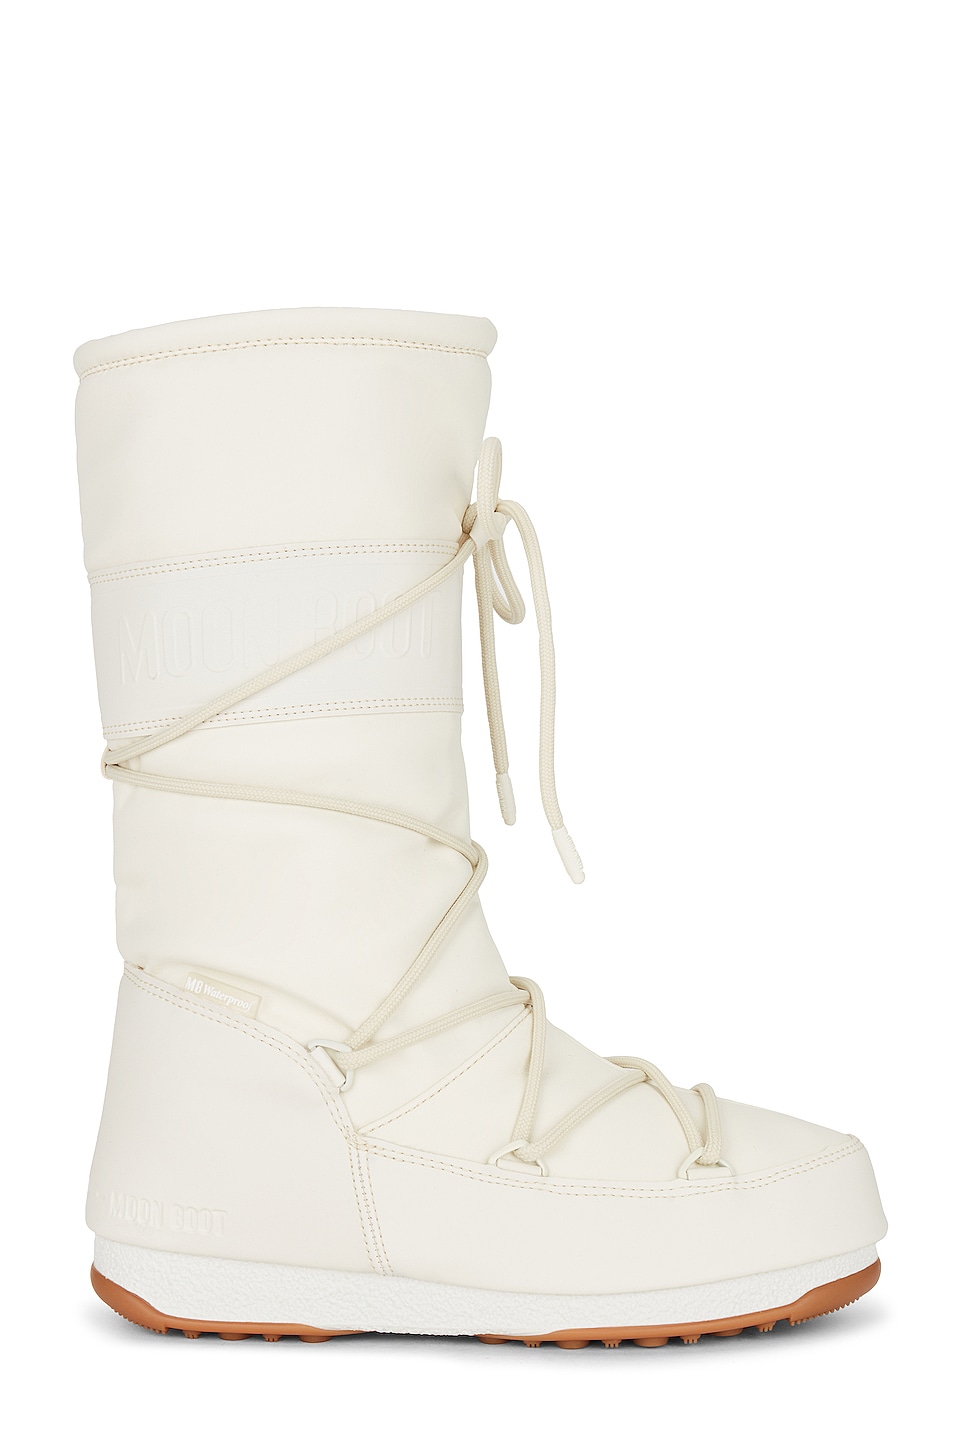 Trend Alert: Moon Boots Are Back!